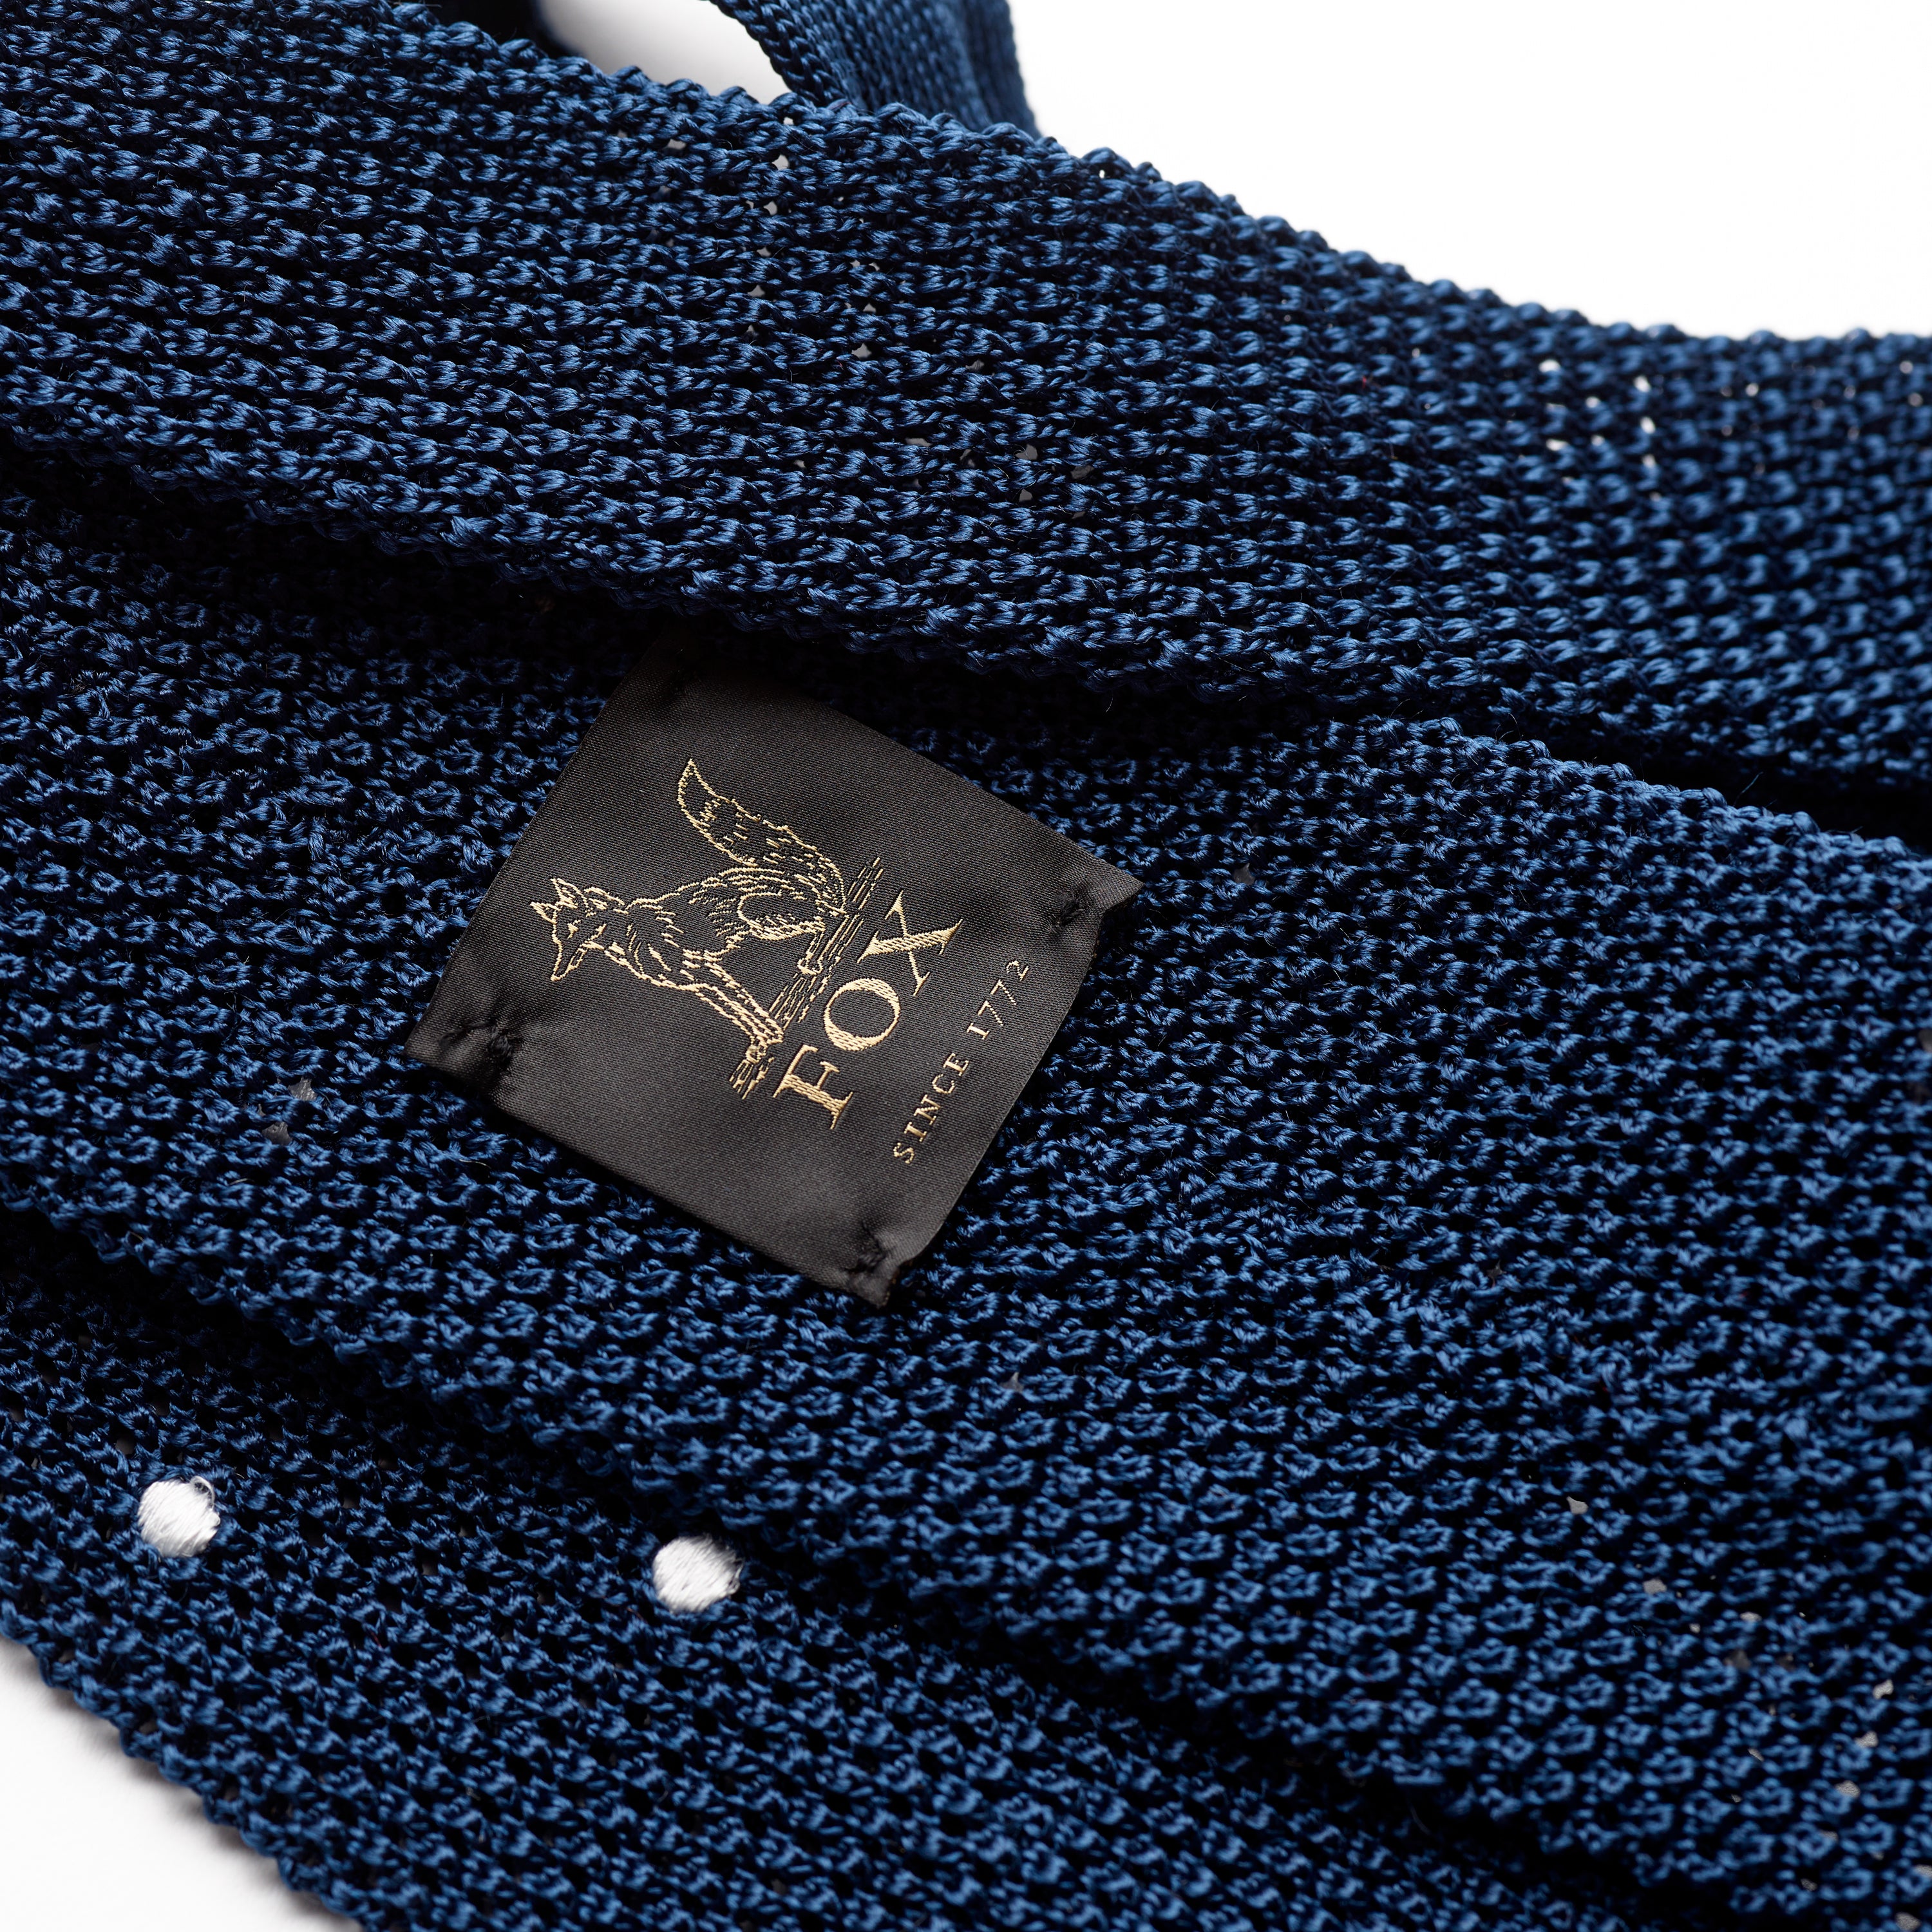 Navy Blue and White Polka Dots Silk Knitted Tie